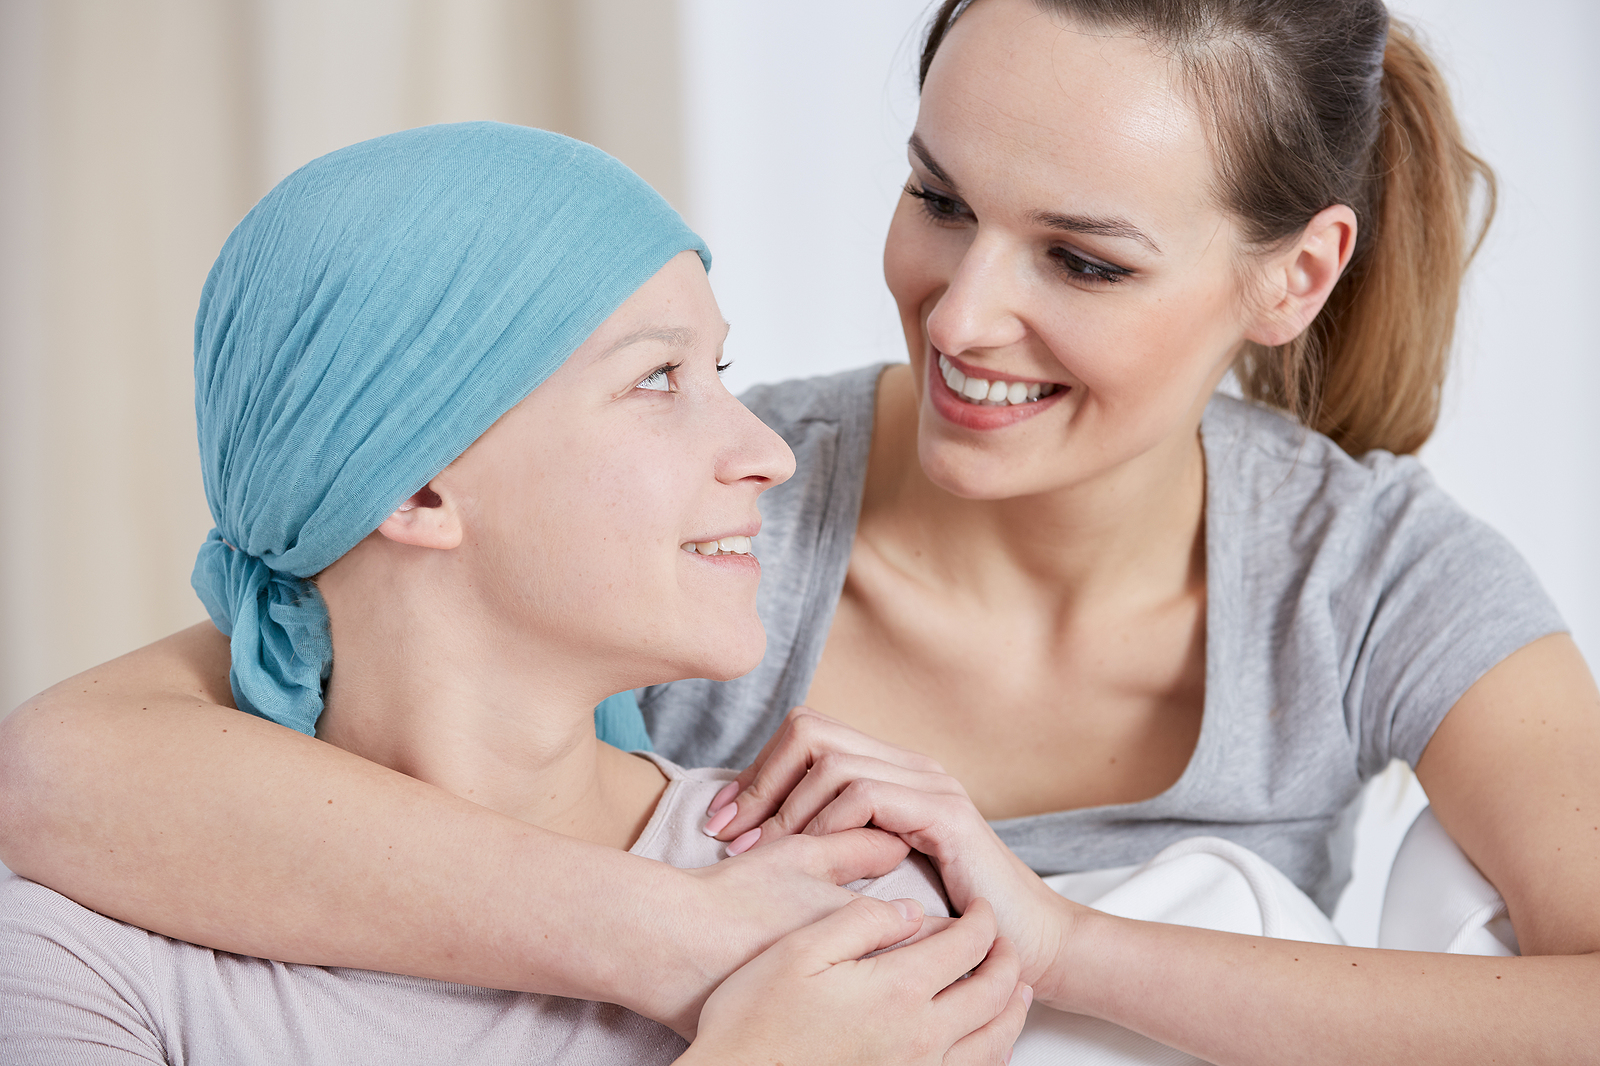 radiotherapy treatment - cancer woman wearing headscarf talking with friend